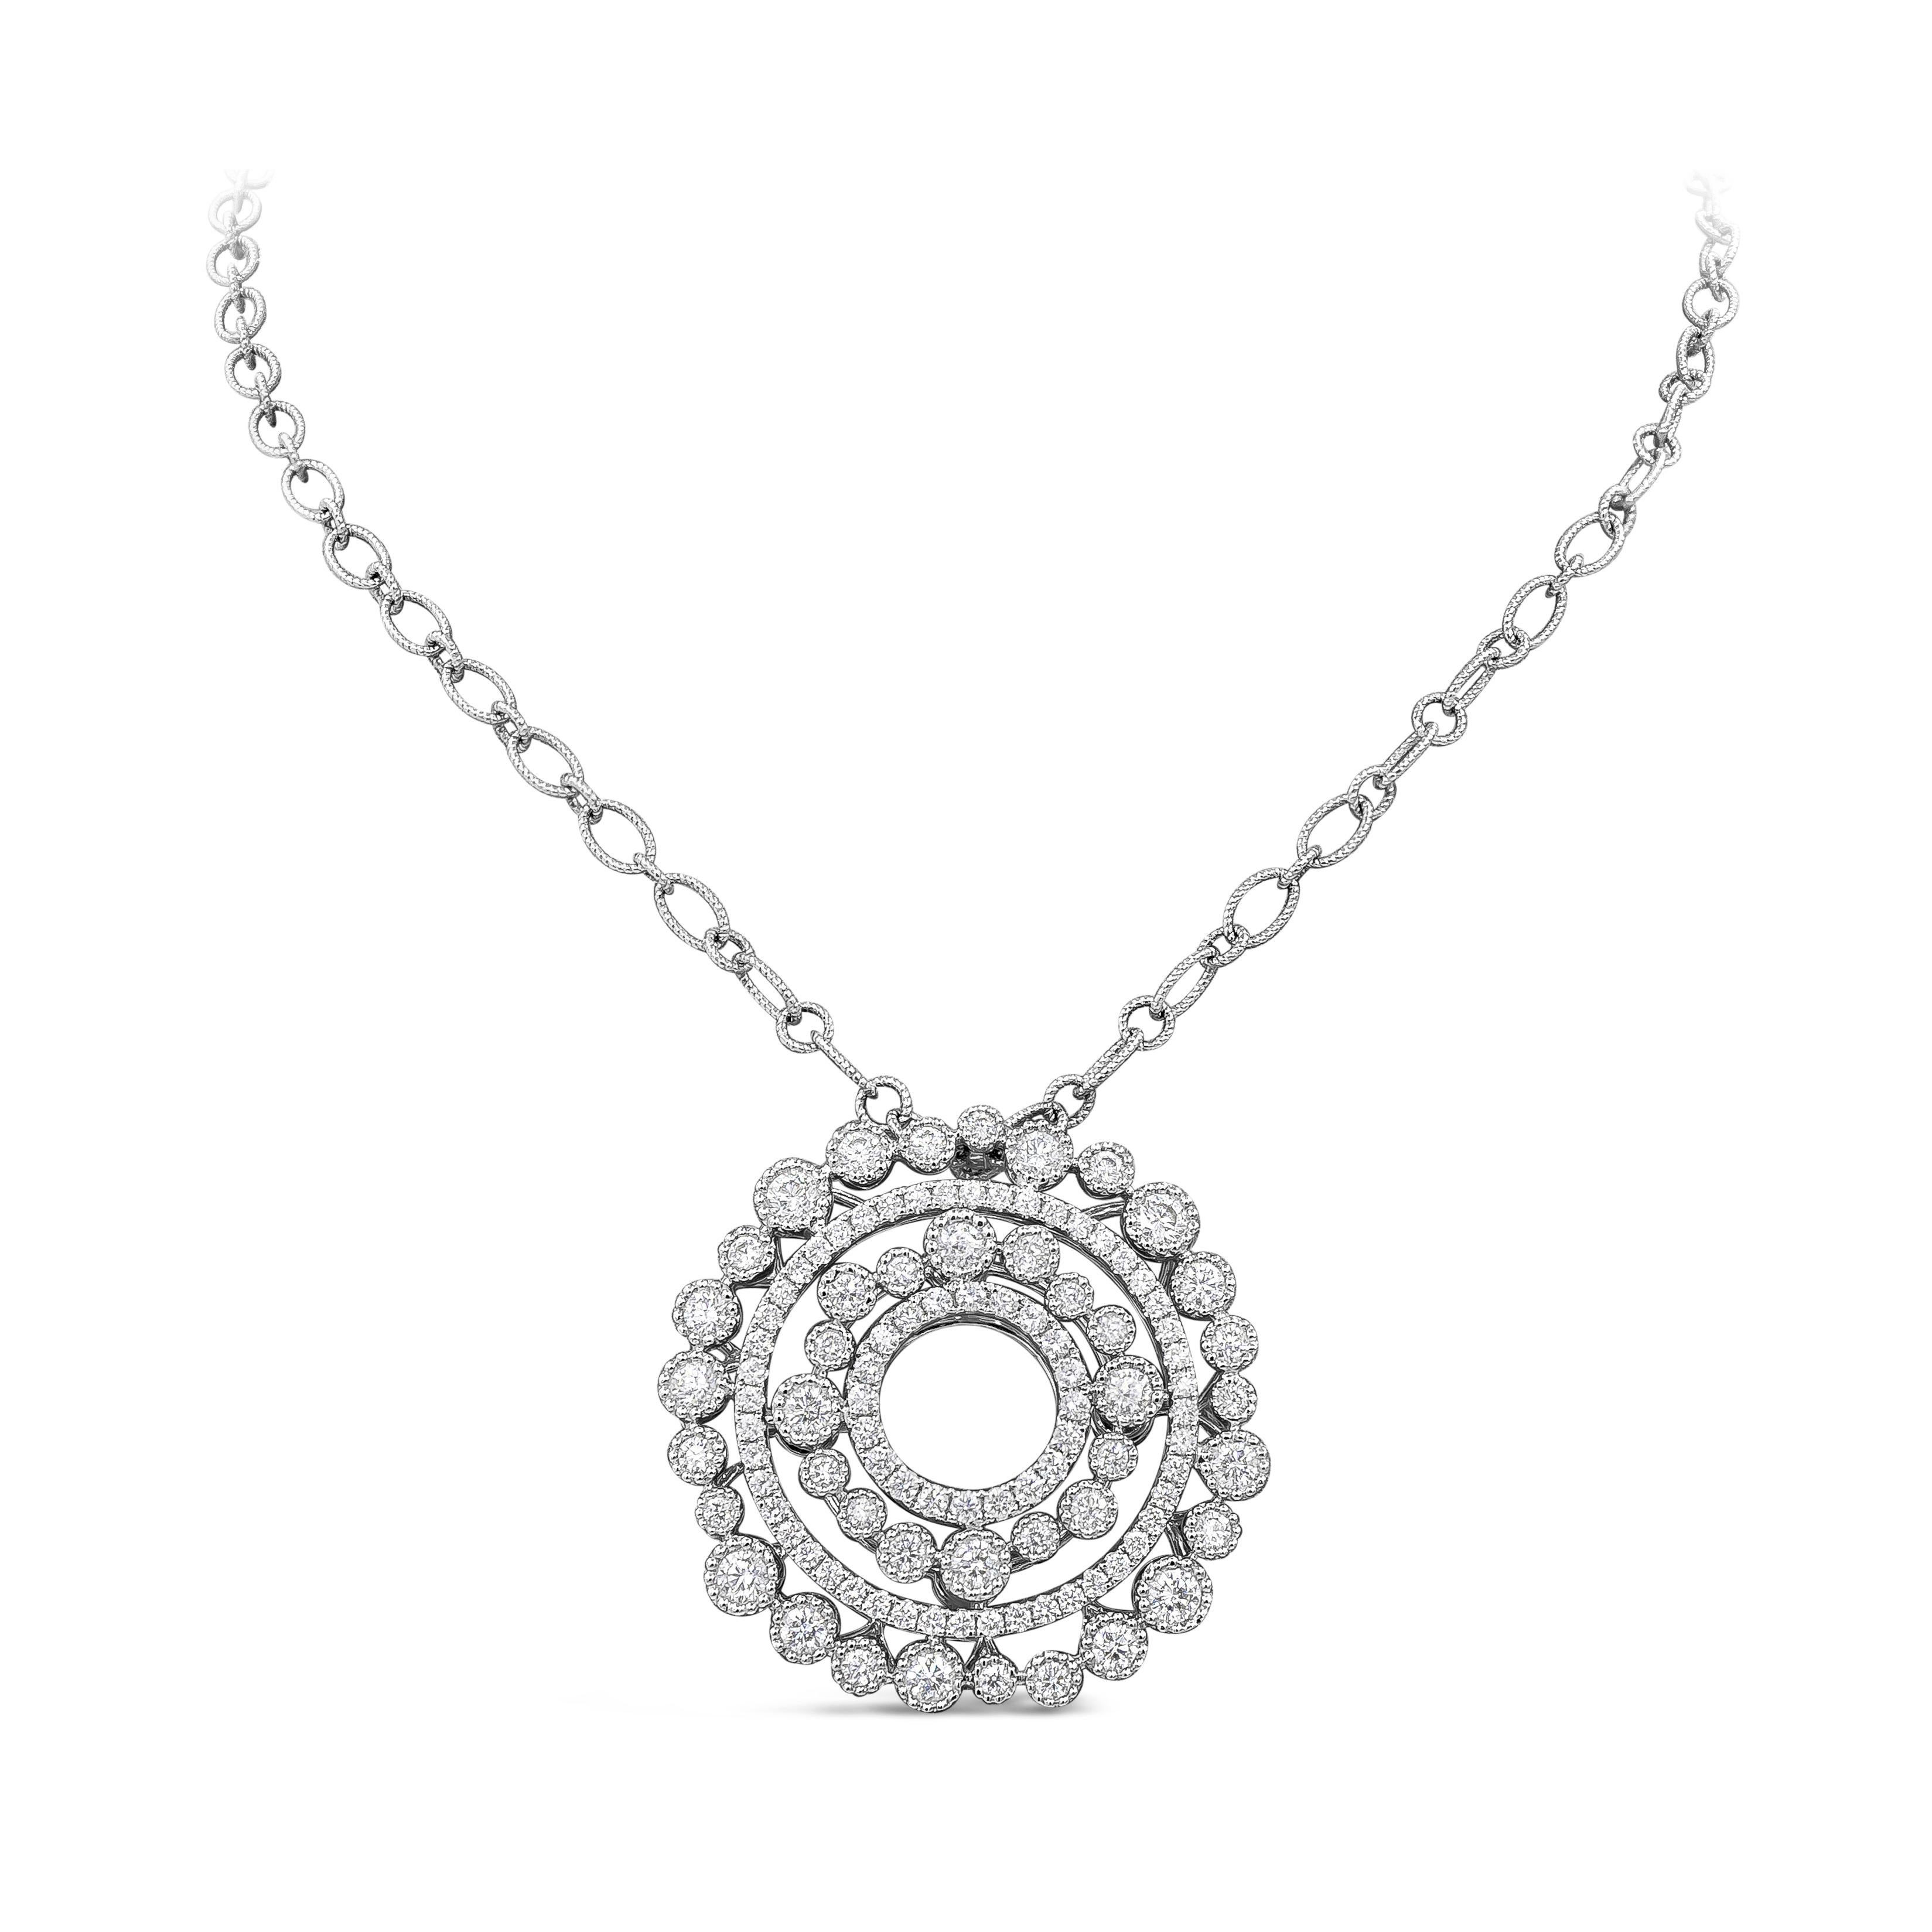 A fashionable and versatile pendant necklace showcasing a four rows of round brilliant diamonds set in a concentric open-work circle design made in 18k white gold. Finished with milgrain edges and diamonds weigh 2.94 carats total. Attached to a 20